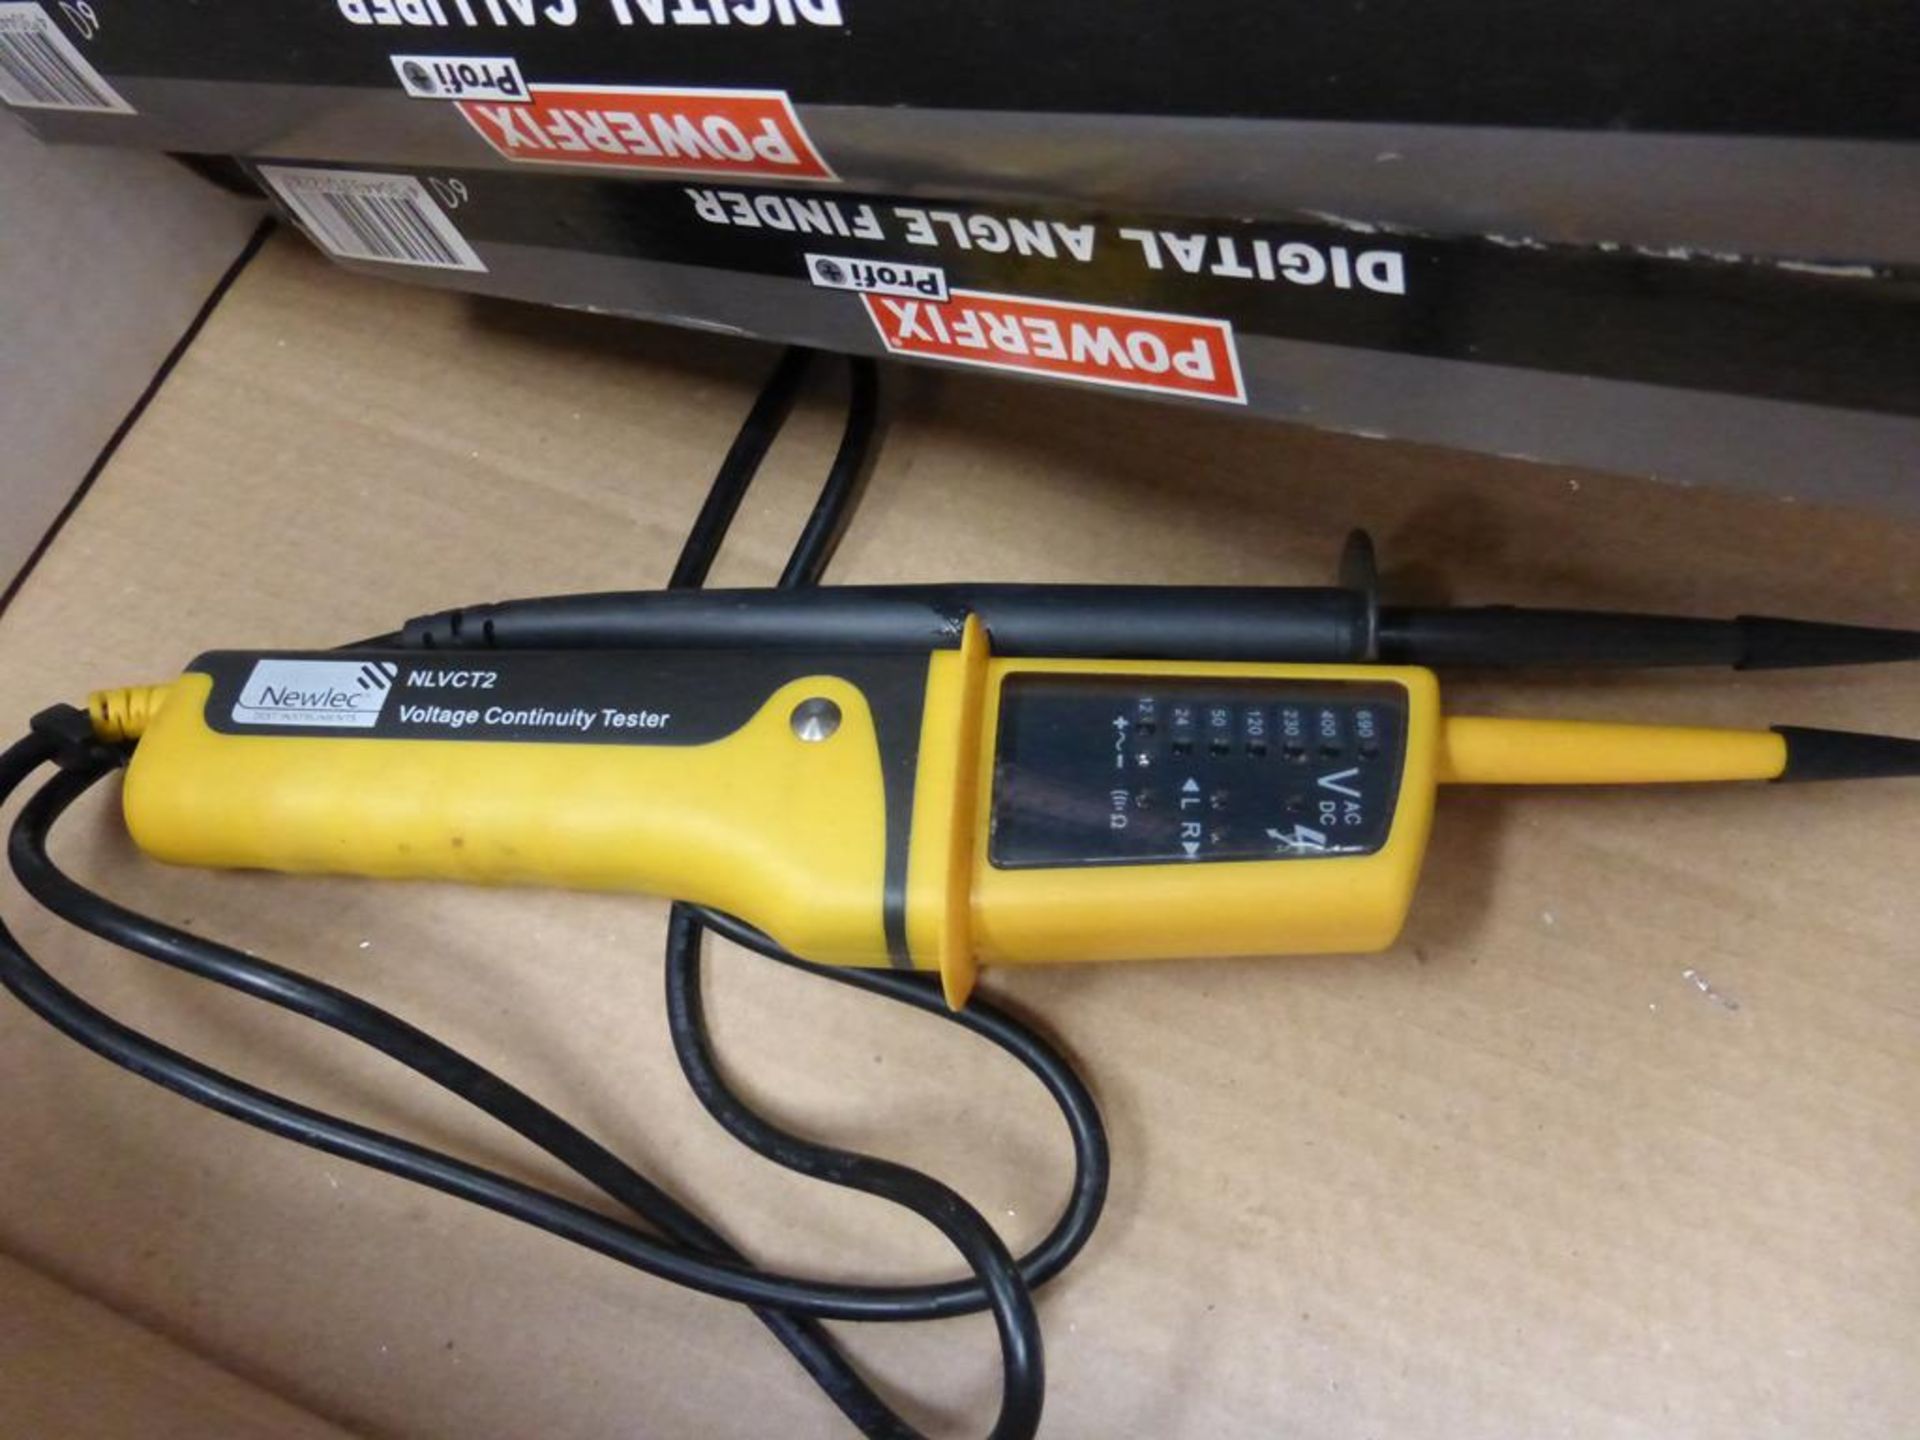 Newlec NLVCT2 Voltage Continuity Tester and other items - Bild 3 aus 4